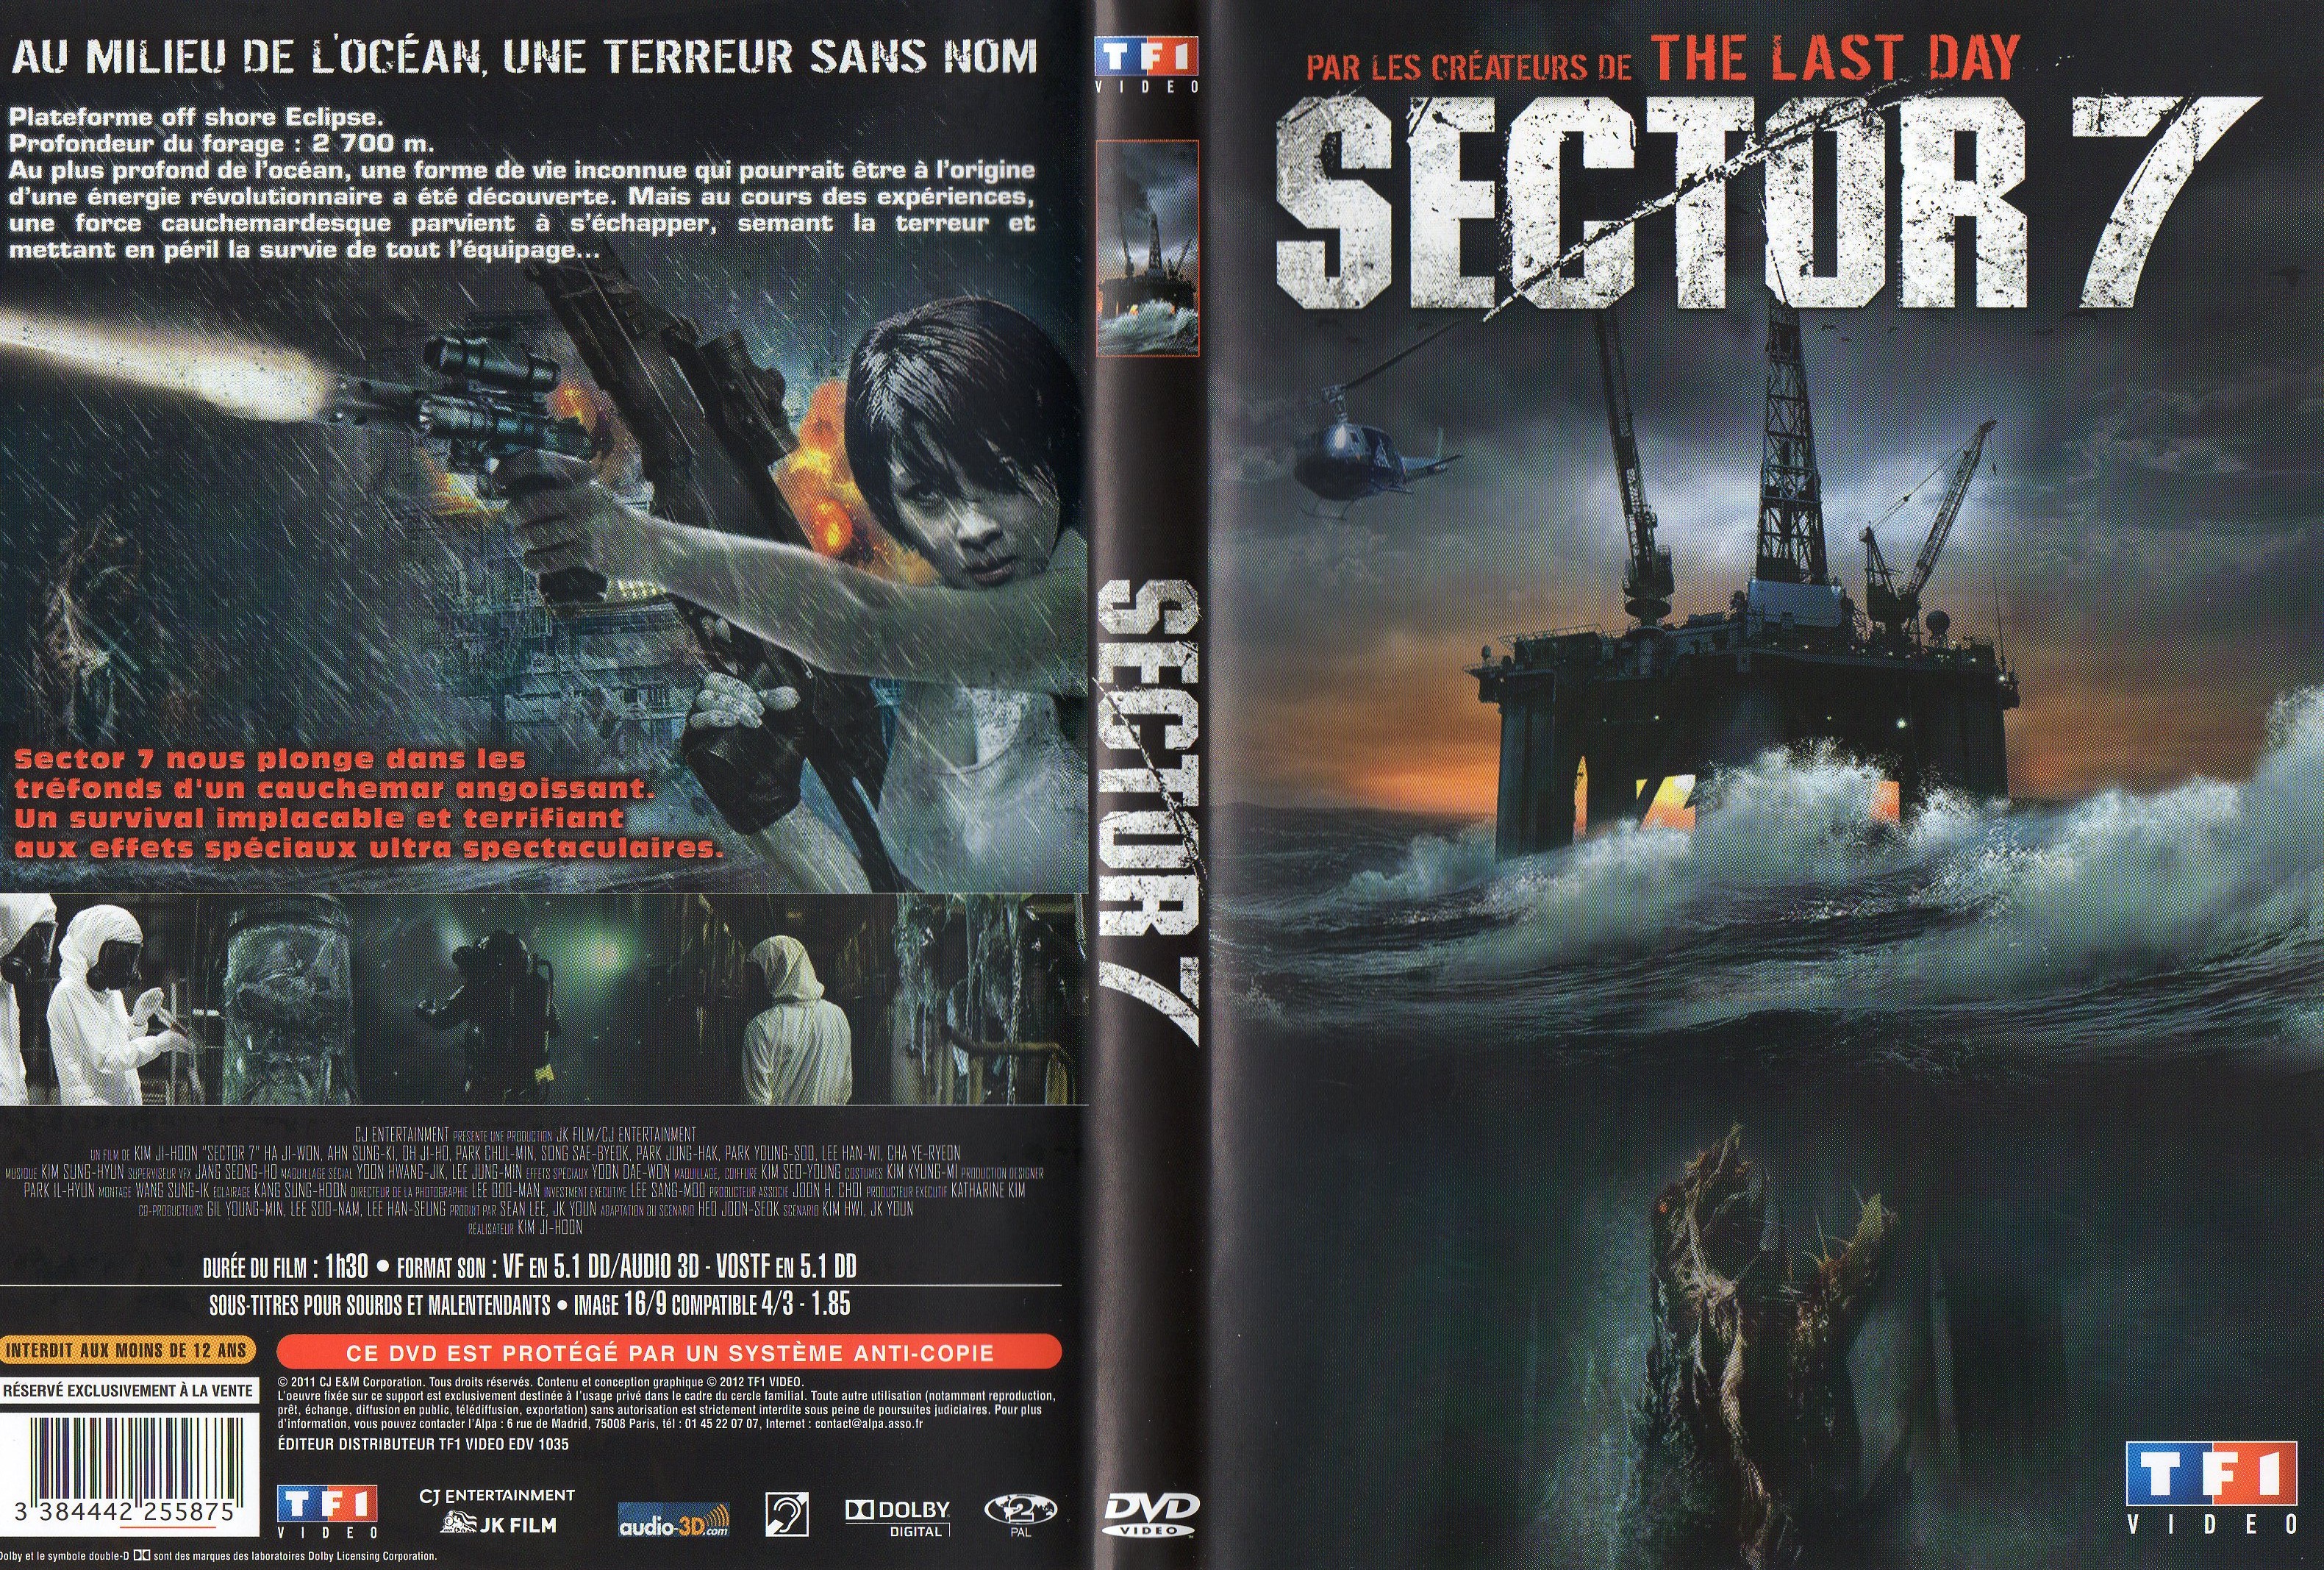 Jaquette DVD Sector 7